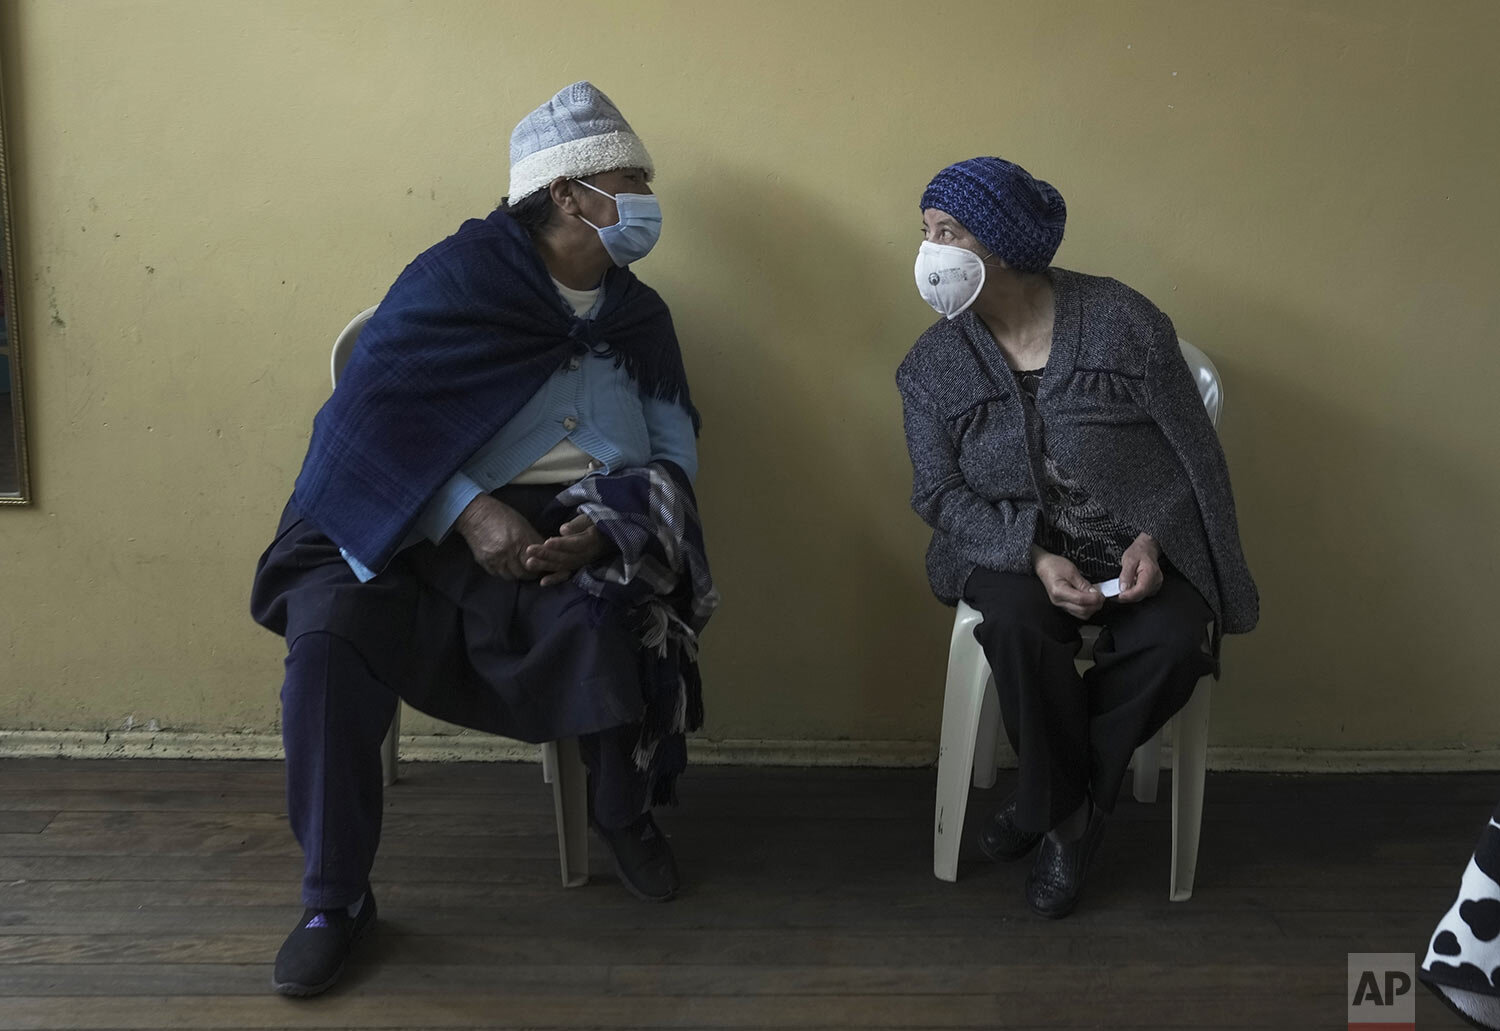  Women visit as they wait for a shot of the COVID-19 vaccine in Pillaro, Ecuador, Thursday, July 8, 2021. (AP Photo/Dolores Ochoa) 